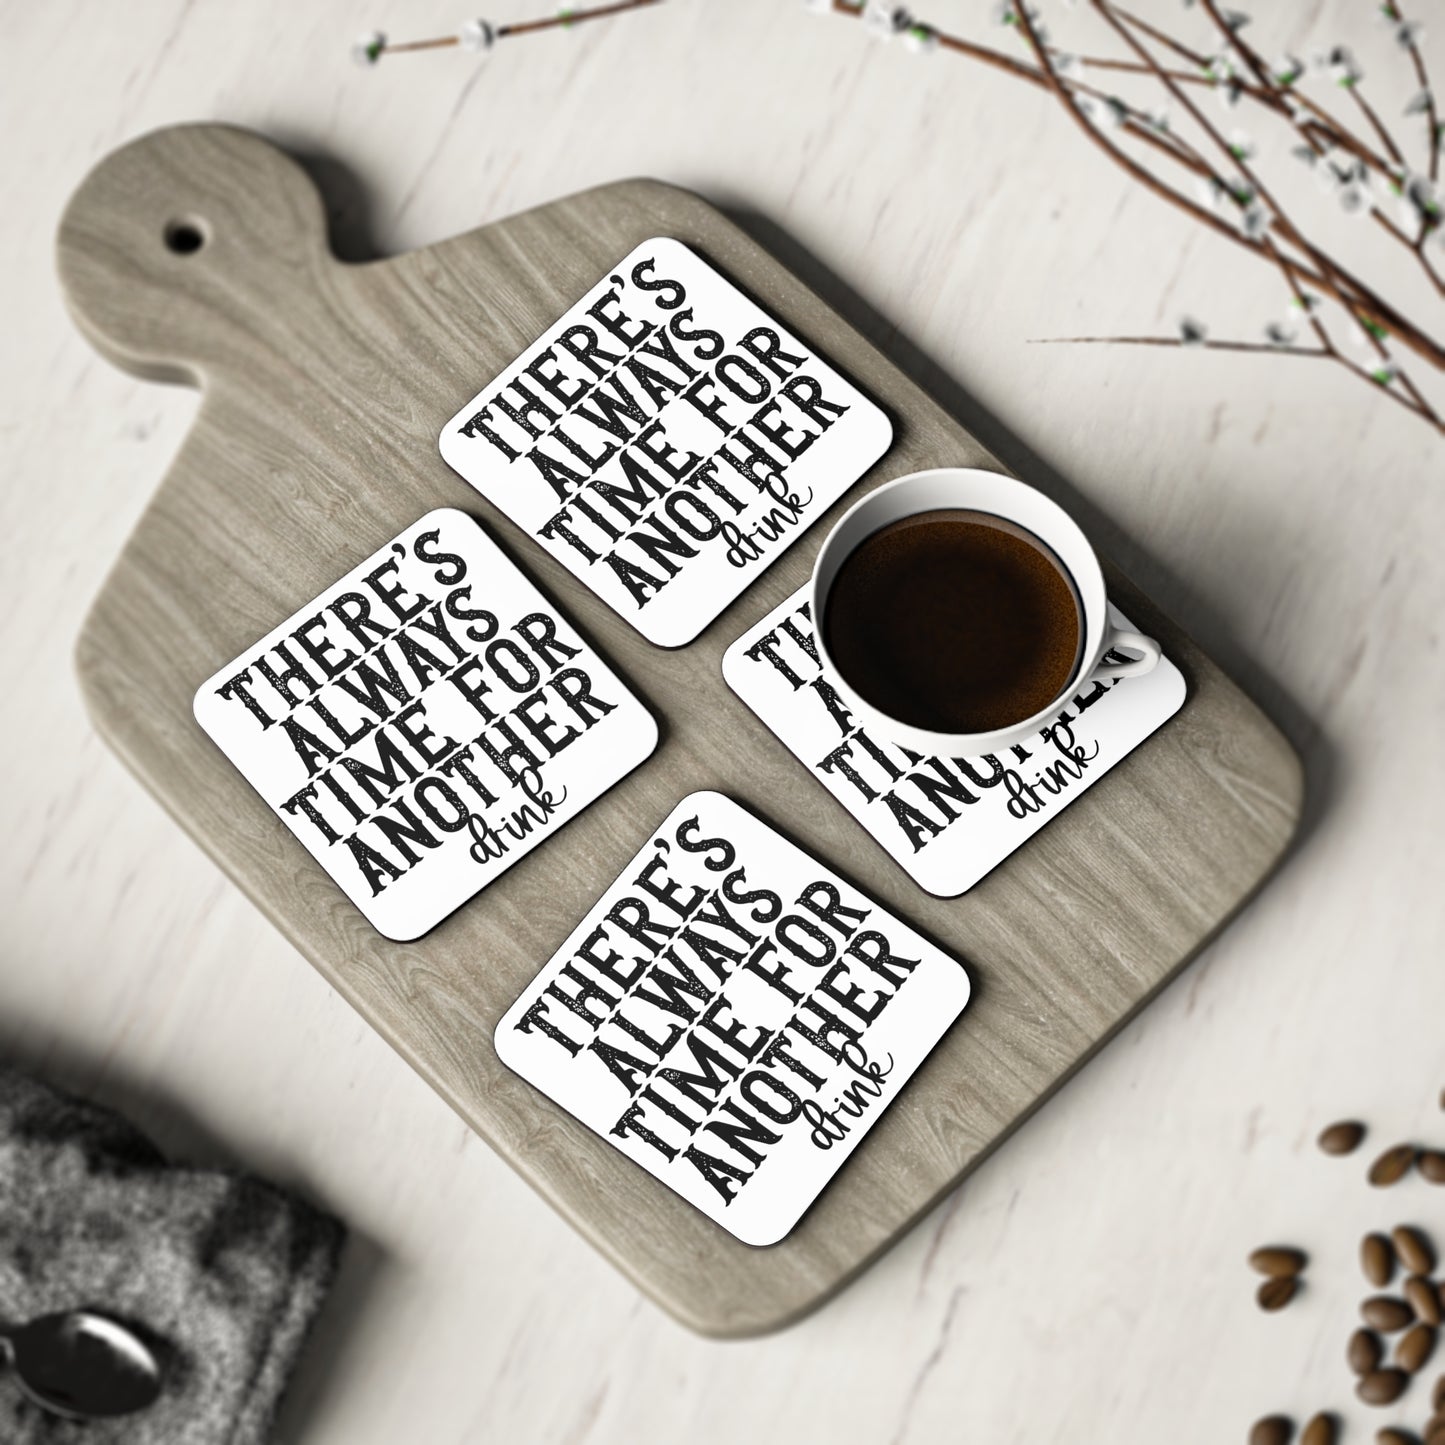 "There's Always Time For Another Drink" Square Coasters